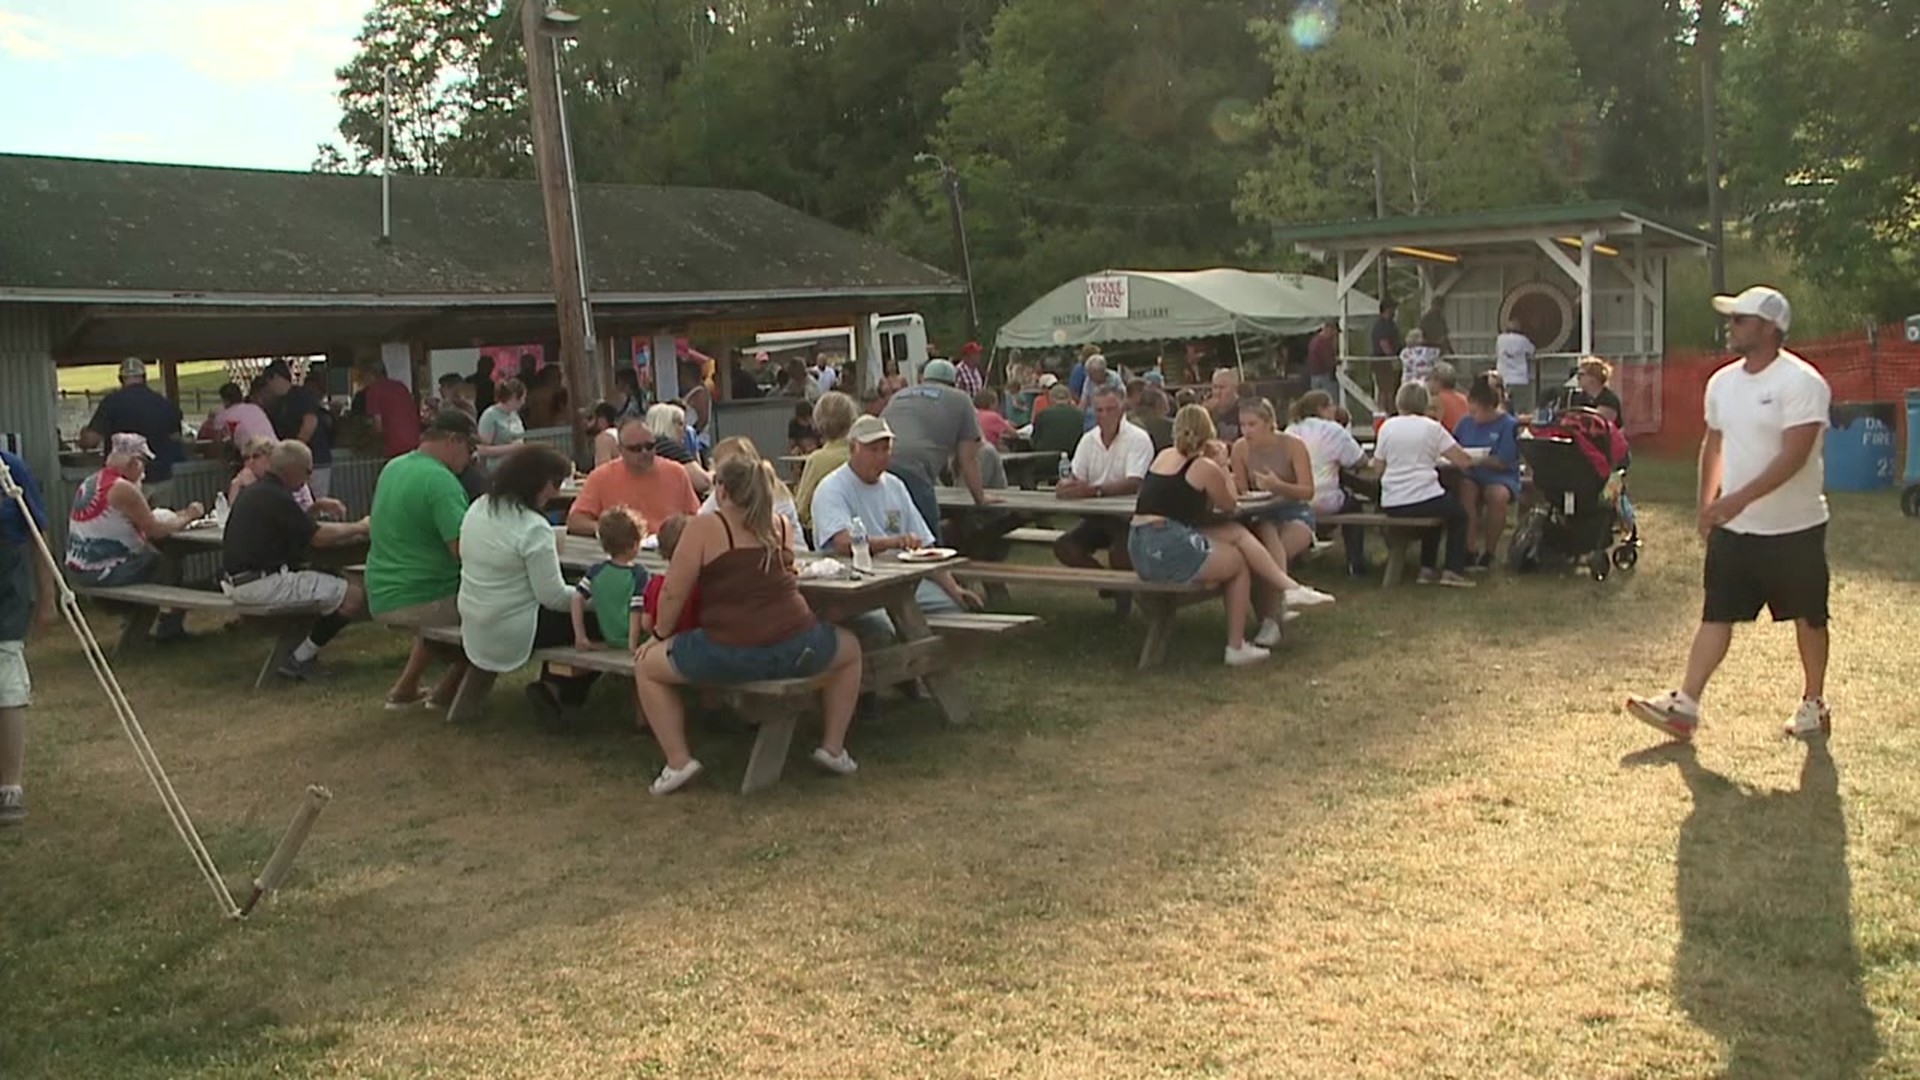 There were plenty of delicious summertime staples being served up and a petting zoo too.